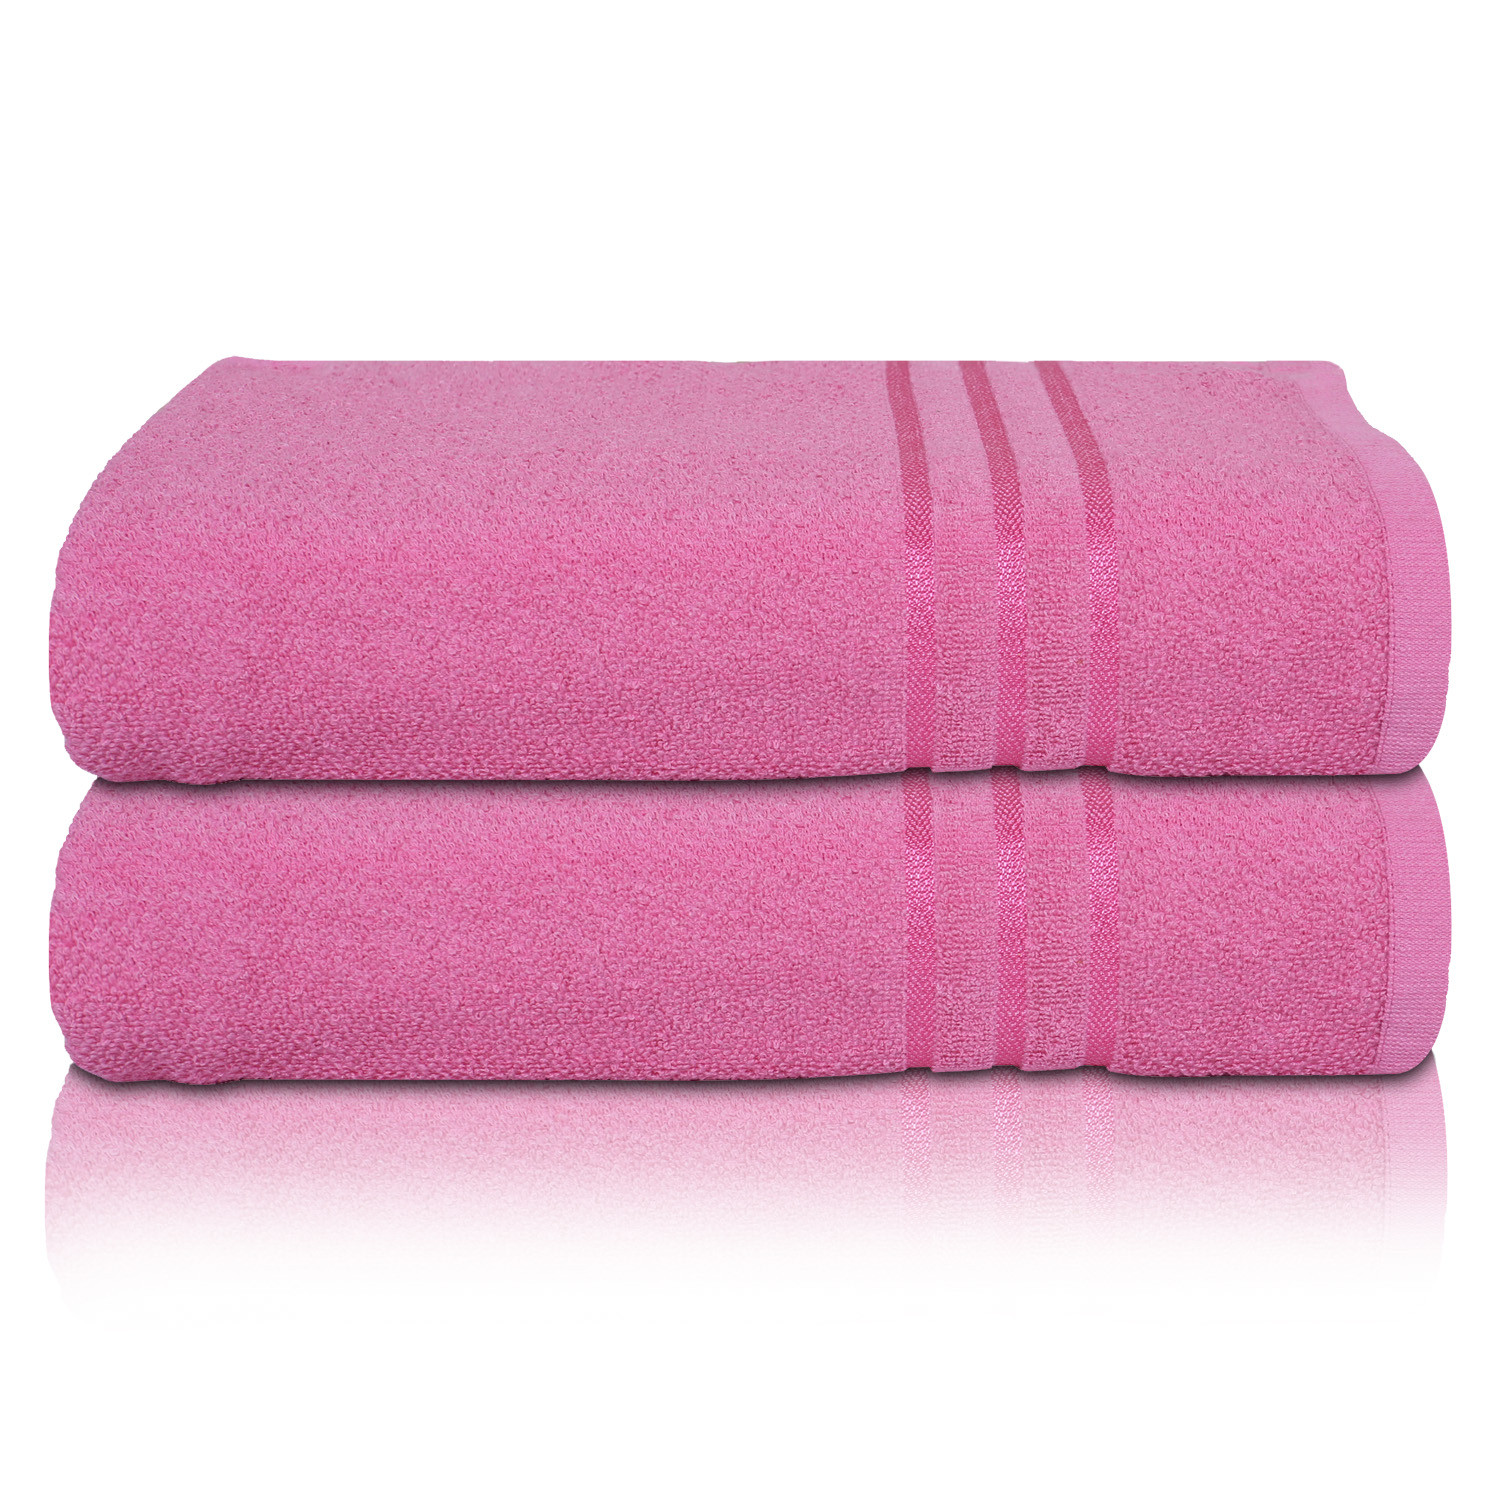 Kuber Industries Cotton Super Absorbent Bath Towel|Anti-Bacterial & Quick Dry Towel for Bath,Beach,Yoga,Fluffy,(Pink,Large)